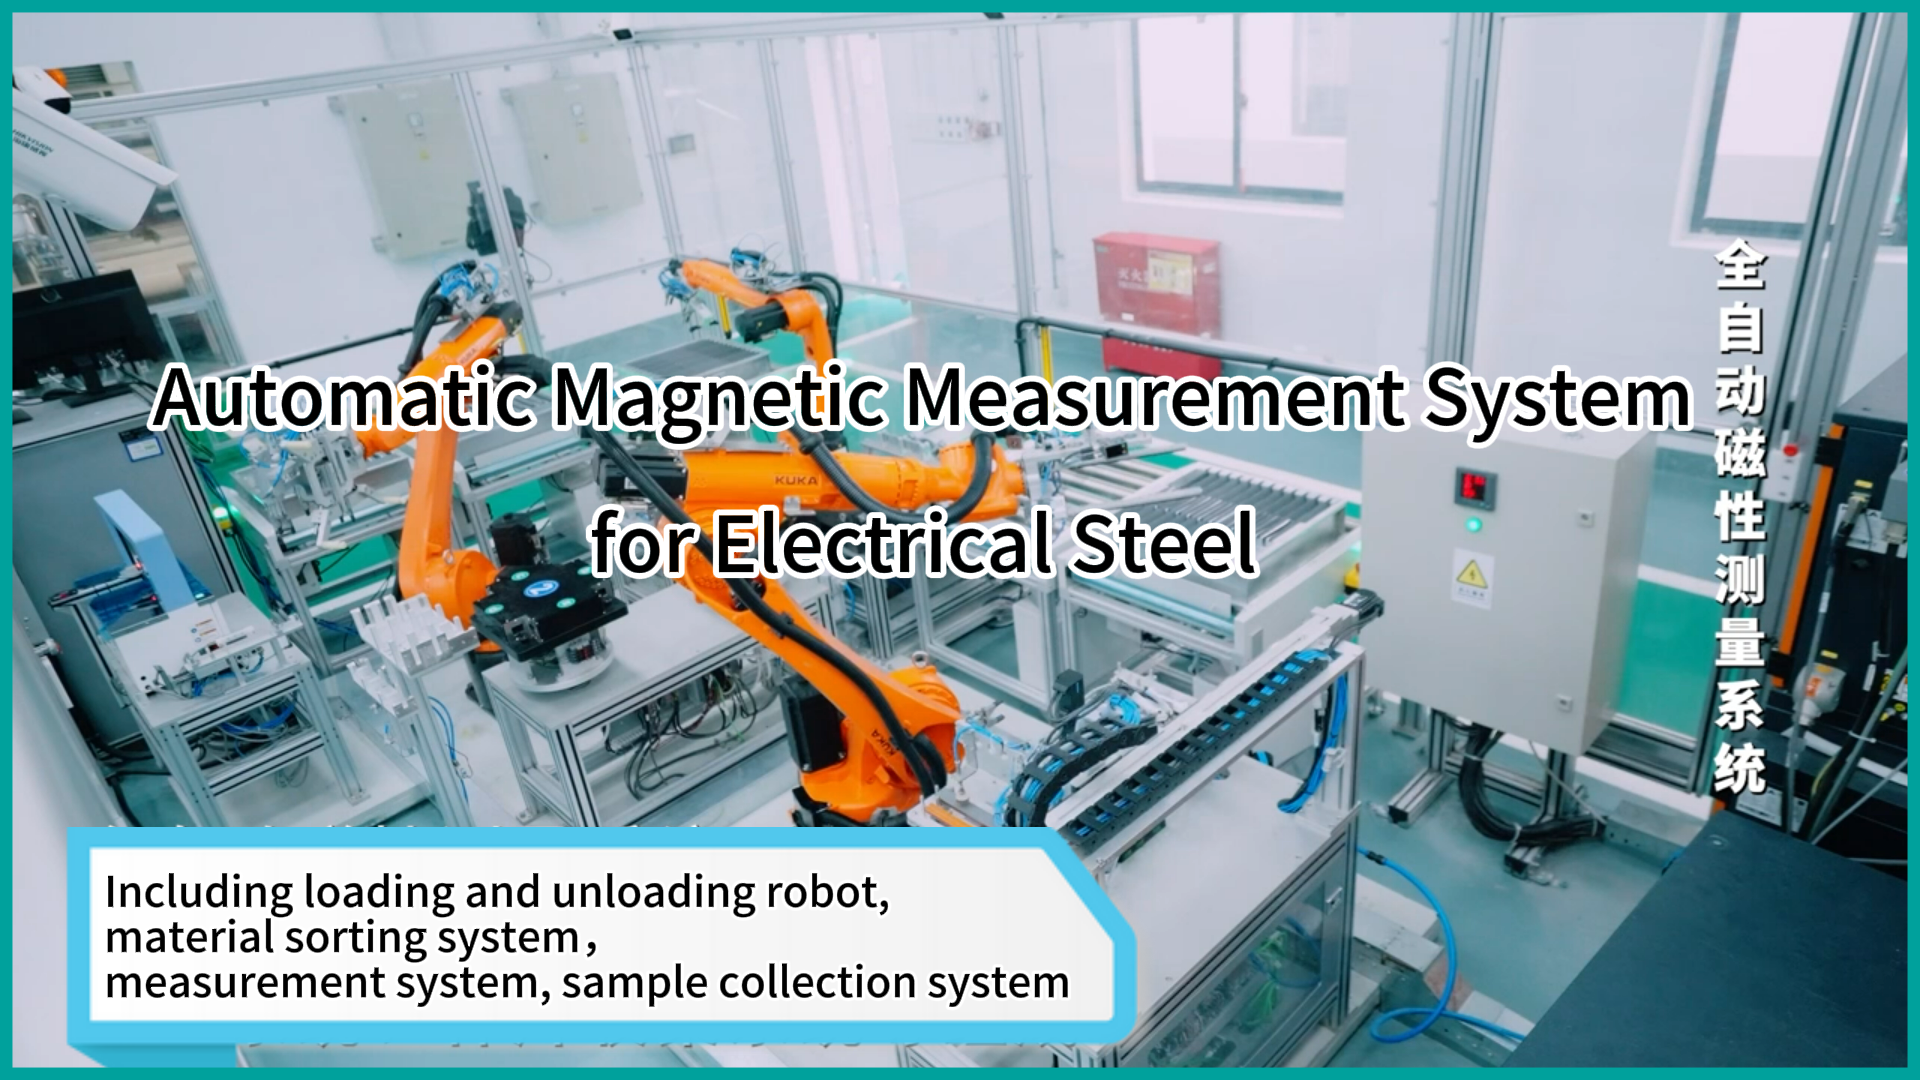 Fully Automated Electrical Steel Magnetic Testing System